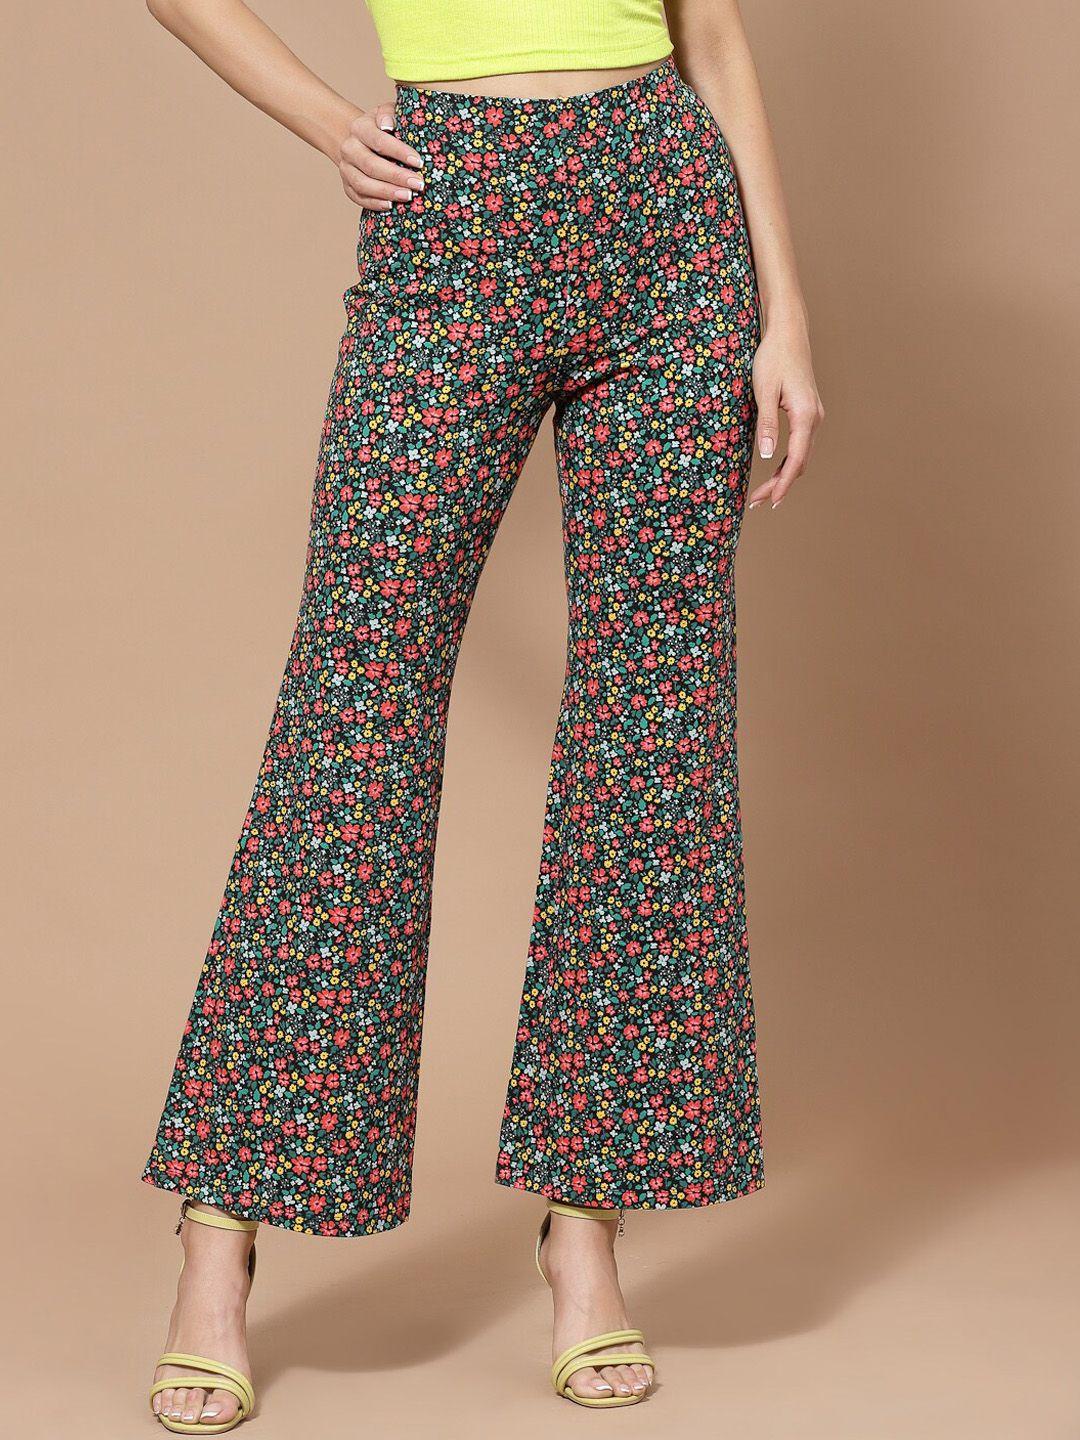 kassually-women-red-floral-printed-high-rise-cotton-trousers